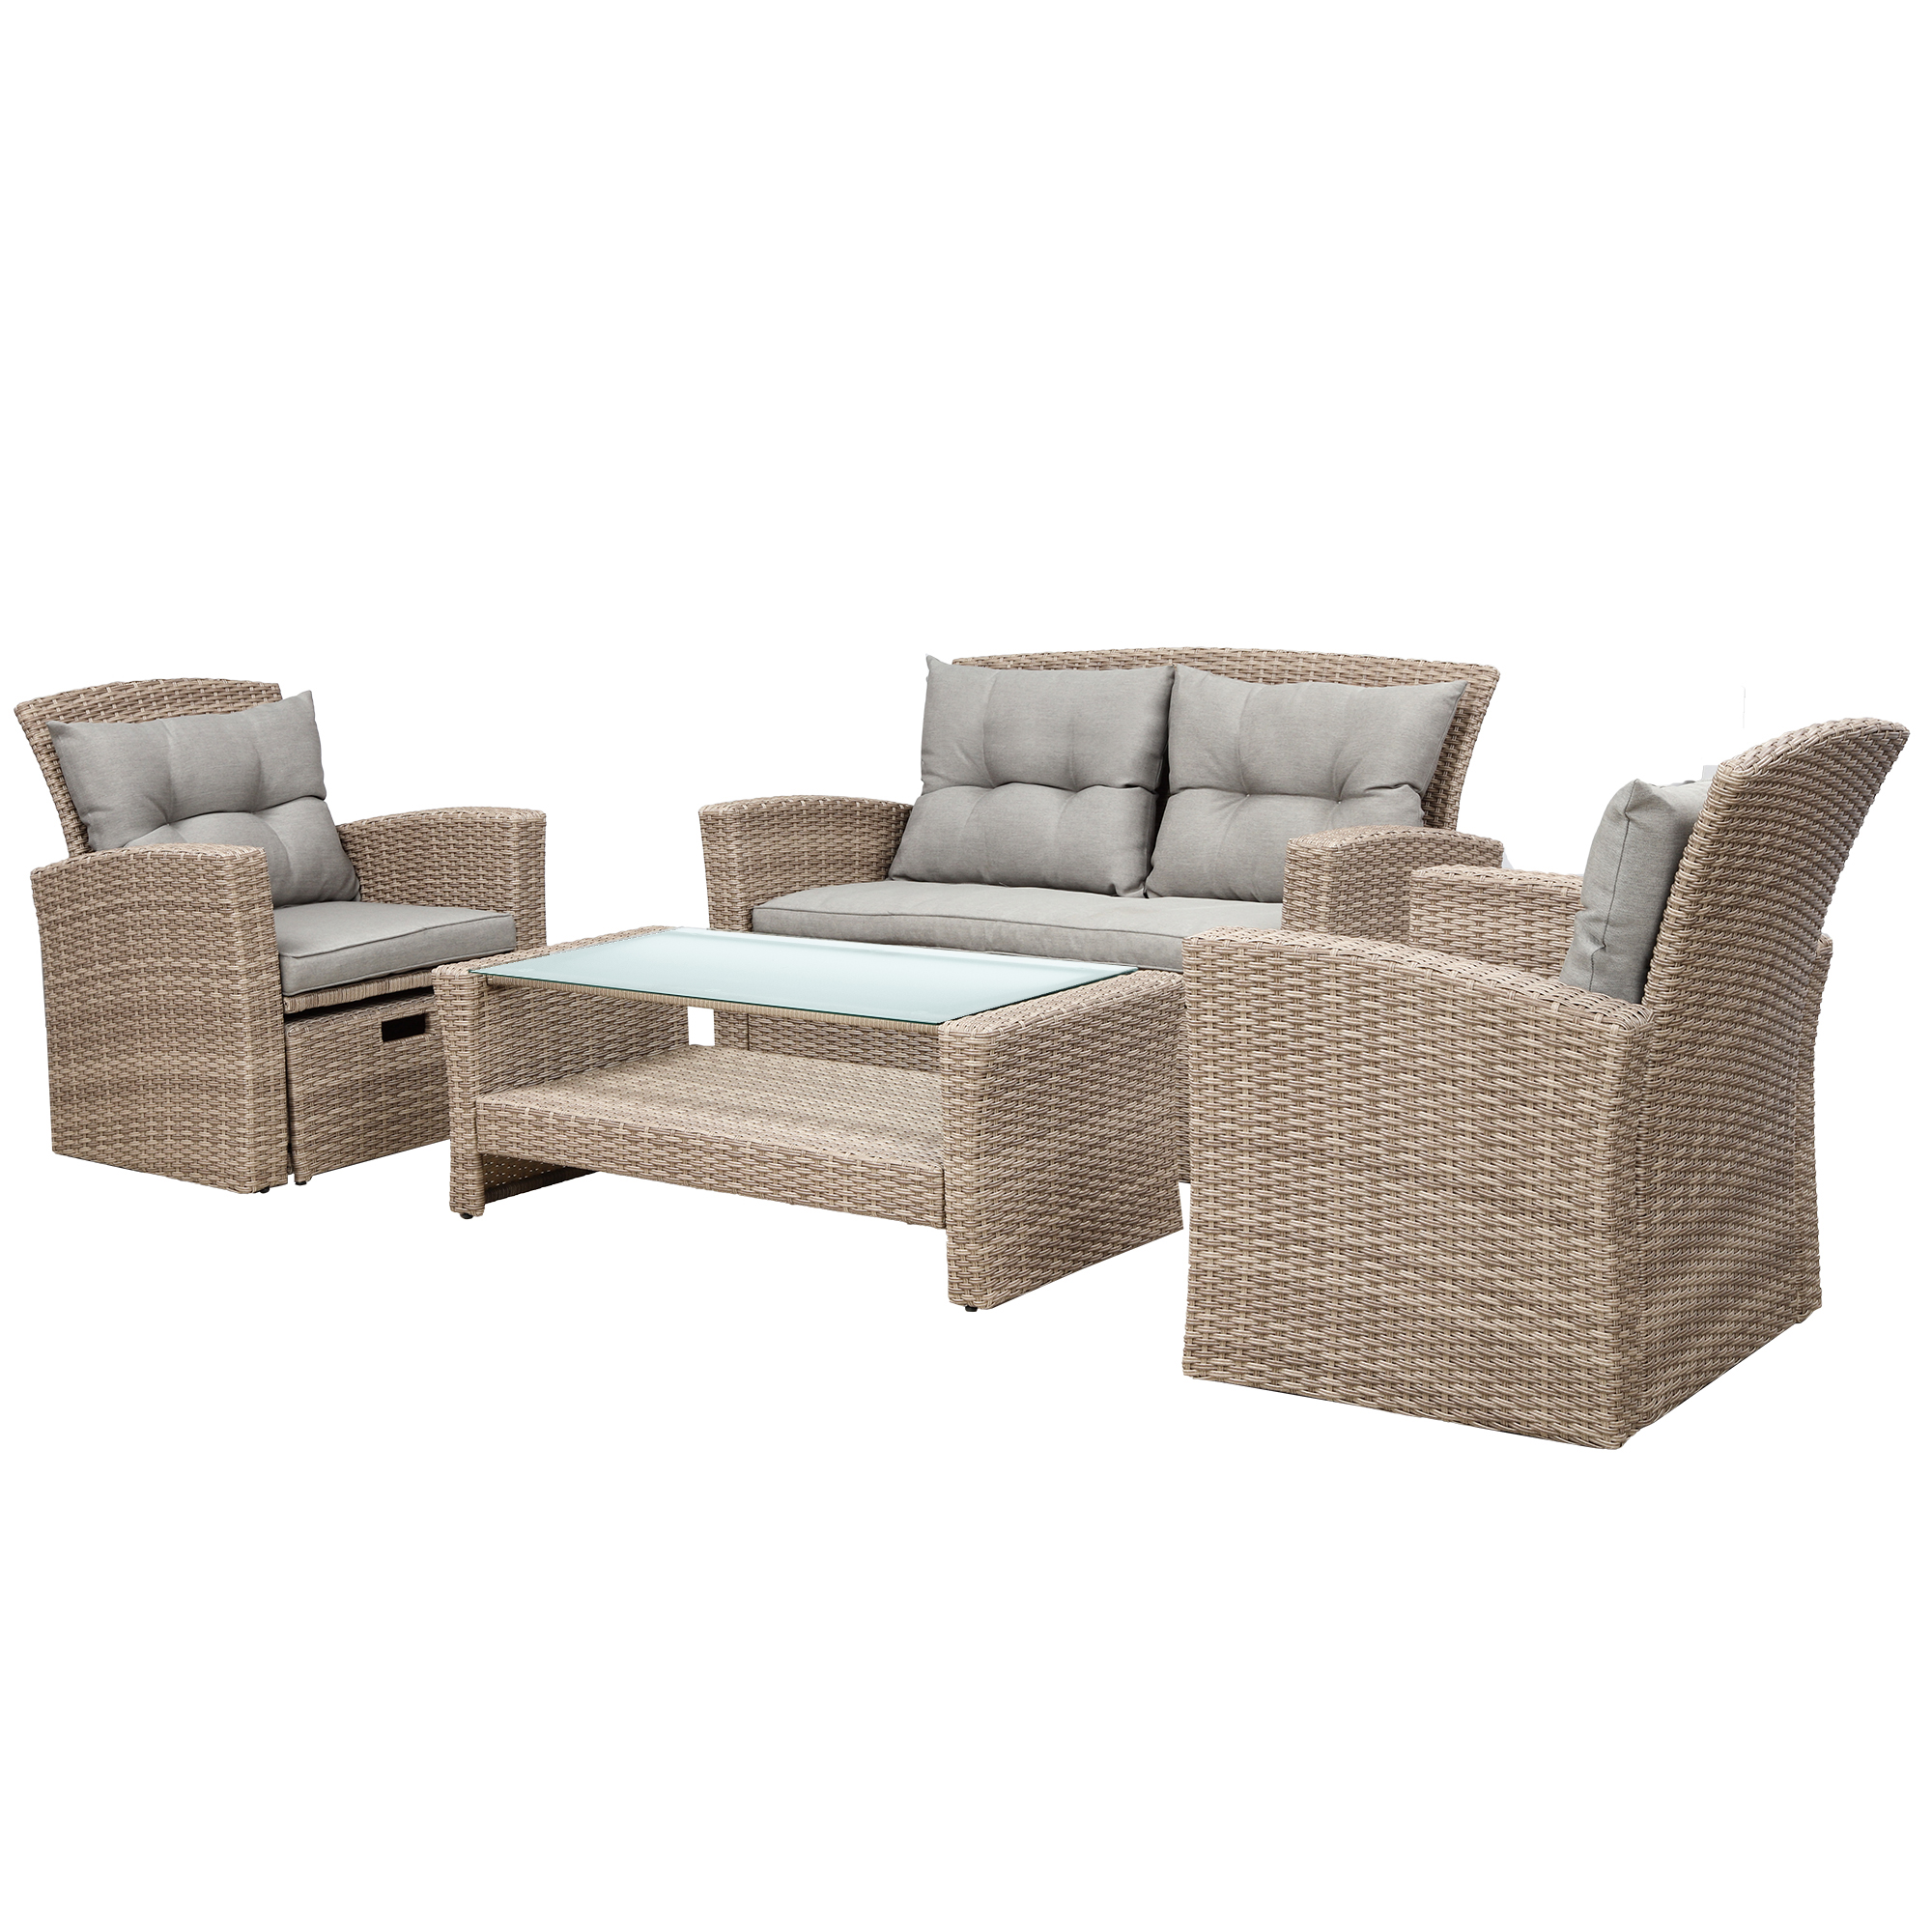 uhomepro Outdoor Patio Furniture Set, 6-Piece PE Rattan Wicker Patio Set with Ottomans and Cushions, Outdoor Conversation Sets with Glass Coffee Table, Porch Patio Bistro Set, Q14472 - image 4 of 12